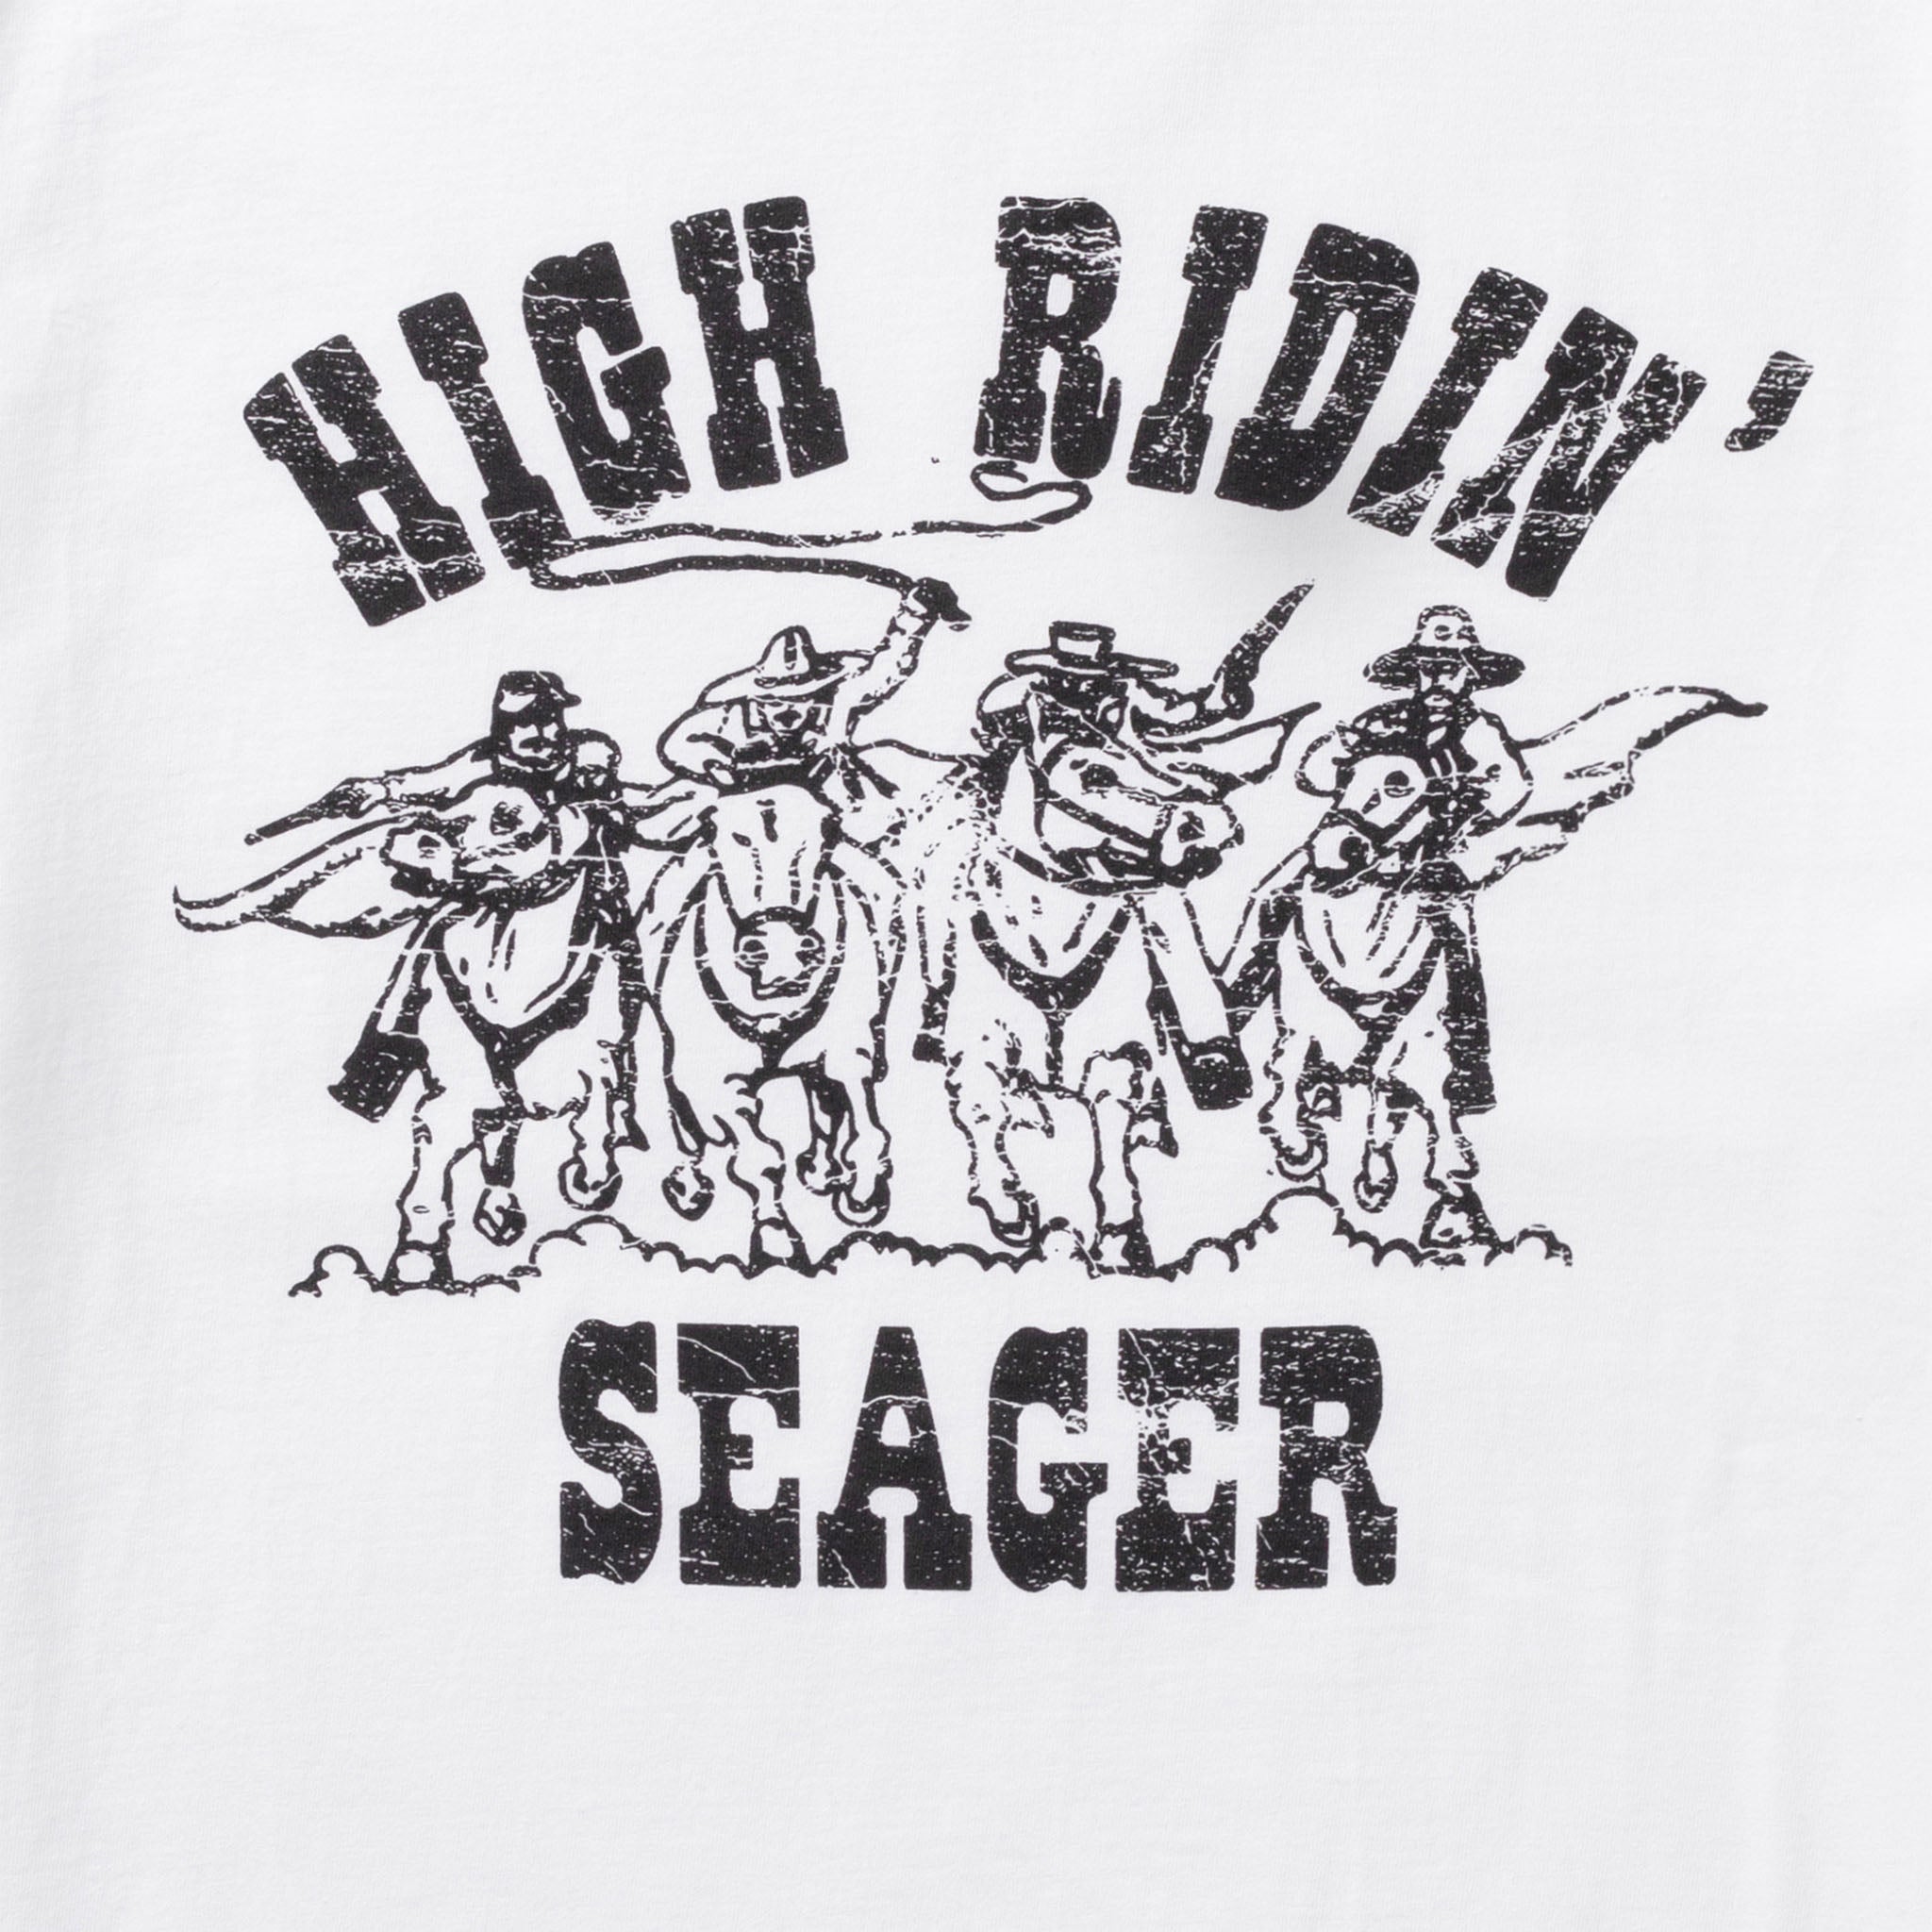 Seager Co. Burnout T-Shirt - Cream, T-Shirts